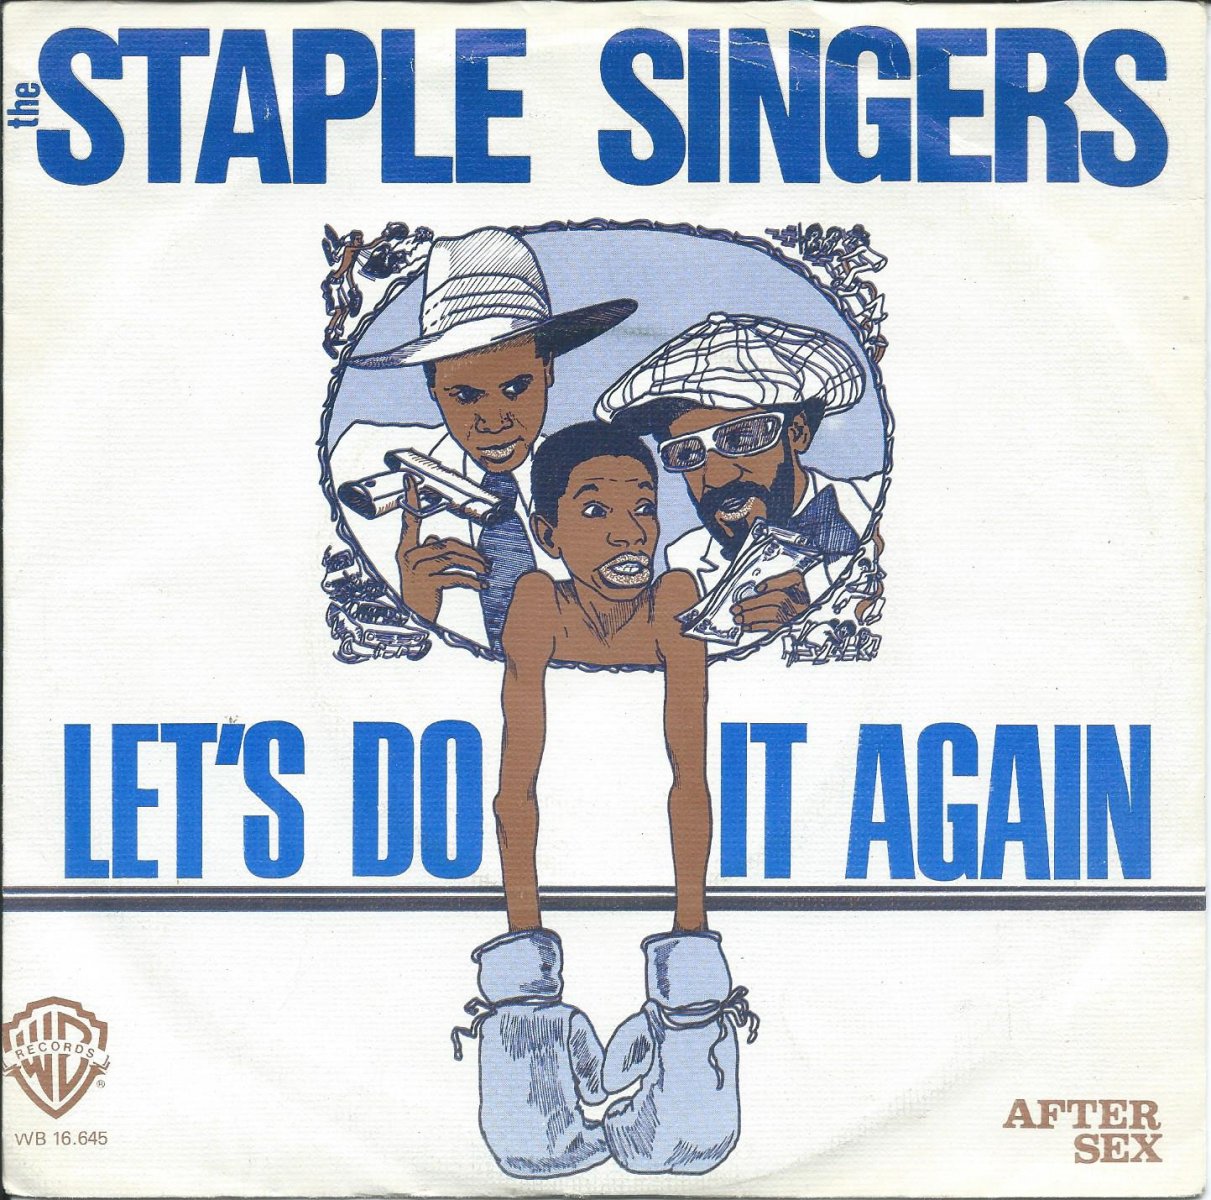 THE STAPLE SINGERS / LET'S DO IT AGAIN / AFTER SEX (7